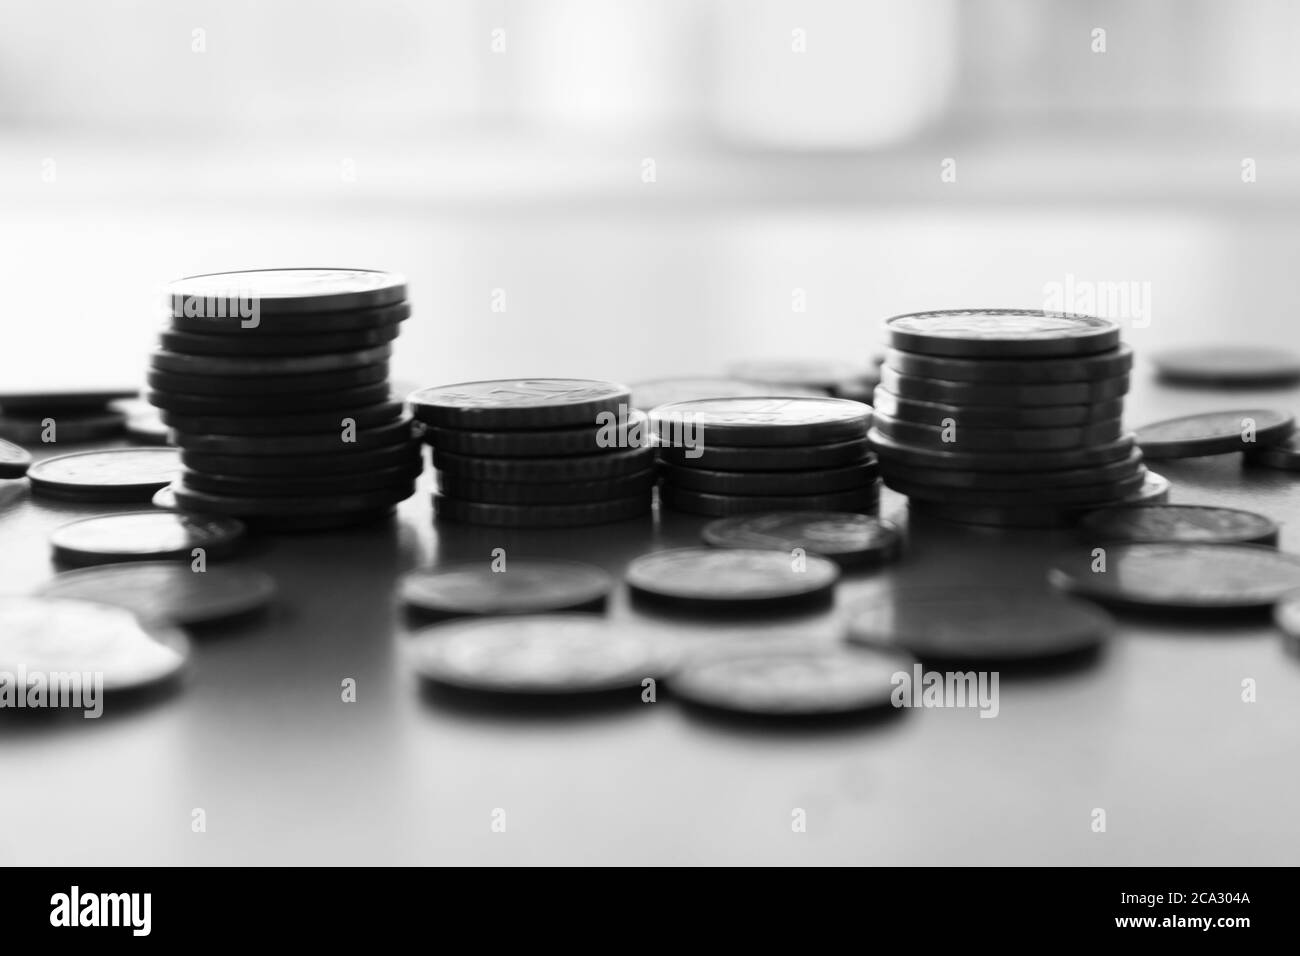 Euro and Europe Coins stacks,diferent sizes and colors.Saving money concept,business and banking..Blurred background.Black and white image. Stock Photo